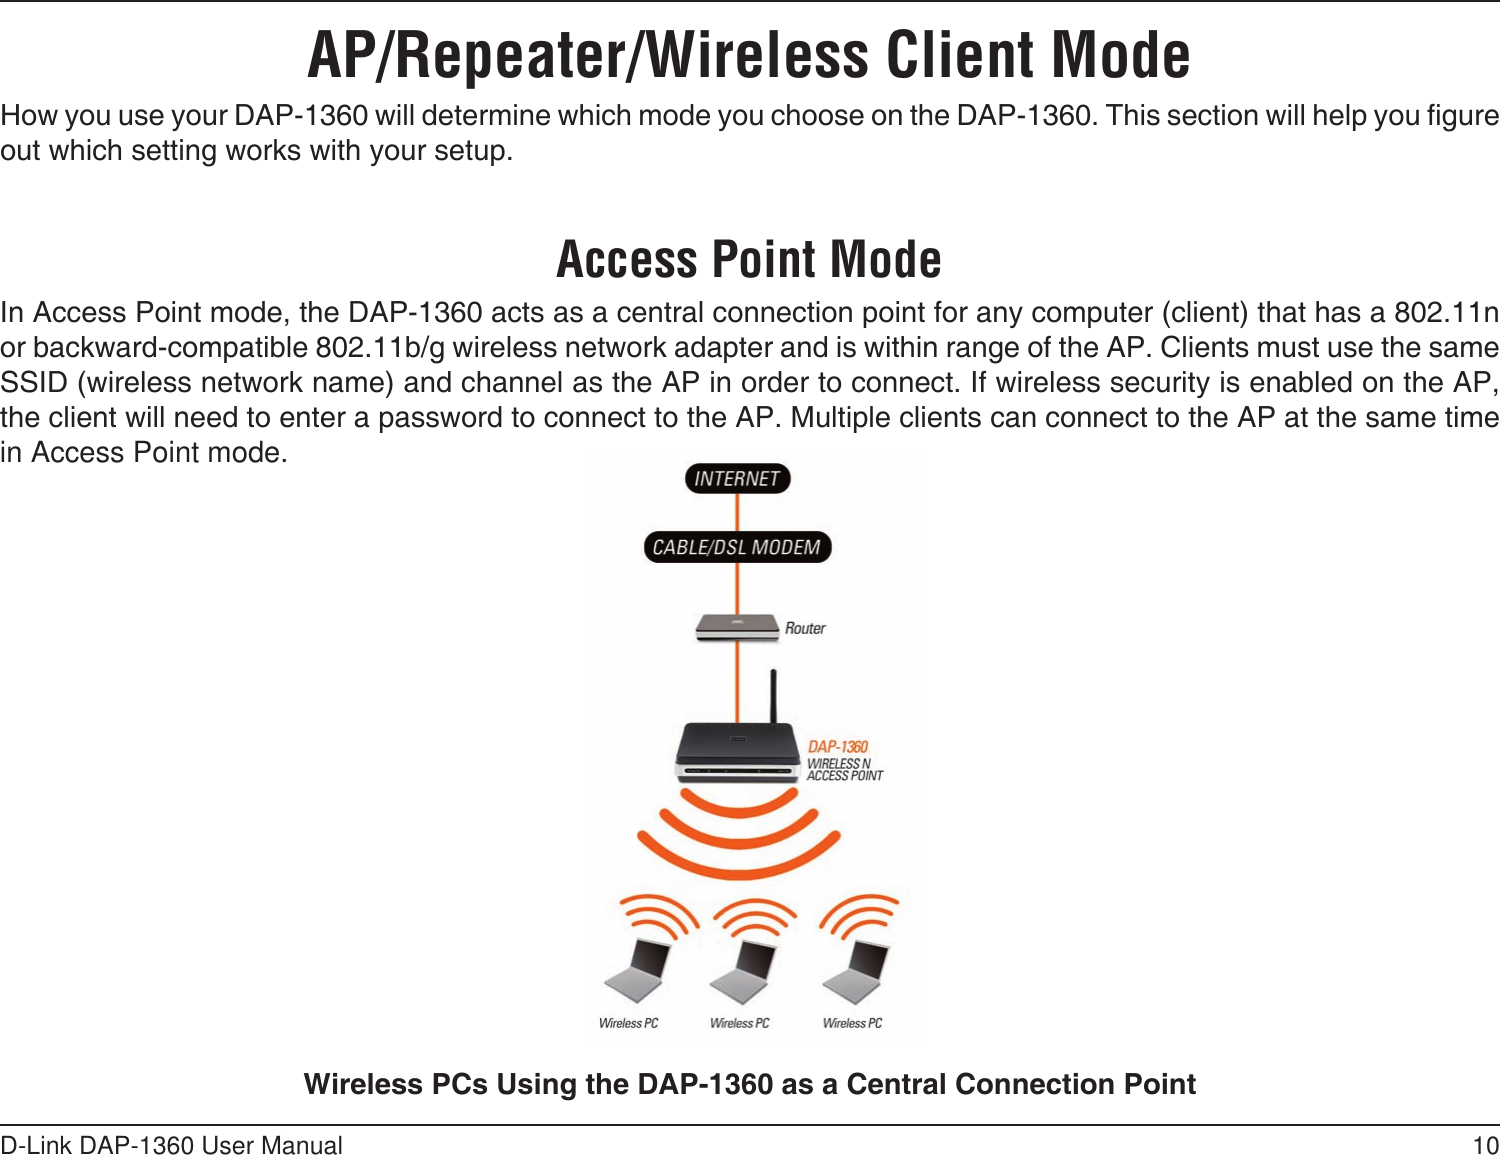 10D-Link DAP-1360 User ManualHow you use your DAP-1360 will determine which mode you choose on the DAP-1360. This section will help you gure out which setting works with your setup.AP/Repeater/Wireless Client ModeAccess Point ModeIn Access Point mode, the DAP-1360 acts as a central connection point for any computer (client) that has a 802.11n or backward-compatible 802.11b/g wireless network adapter and is within range of the AP. Clients must use the same SSID (wireless network name) and channel as the AP in order to connect. If wireless security is enabled on the AP, the client will need to enter a password to connect to the AP. Multiple clients can connect to the AP at the same time in Access Point mode. Wireless PCs Using the DAP-1360 as a Central Connection Point